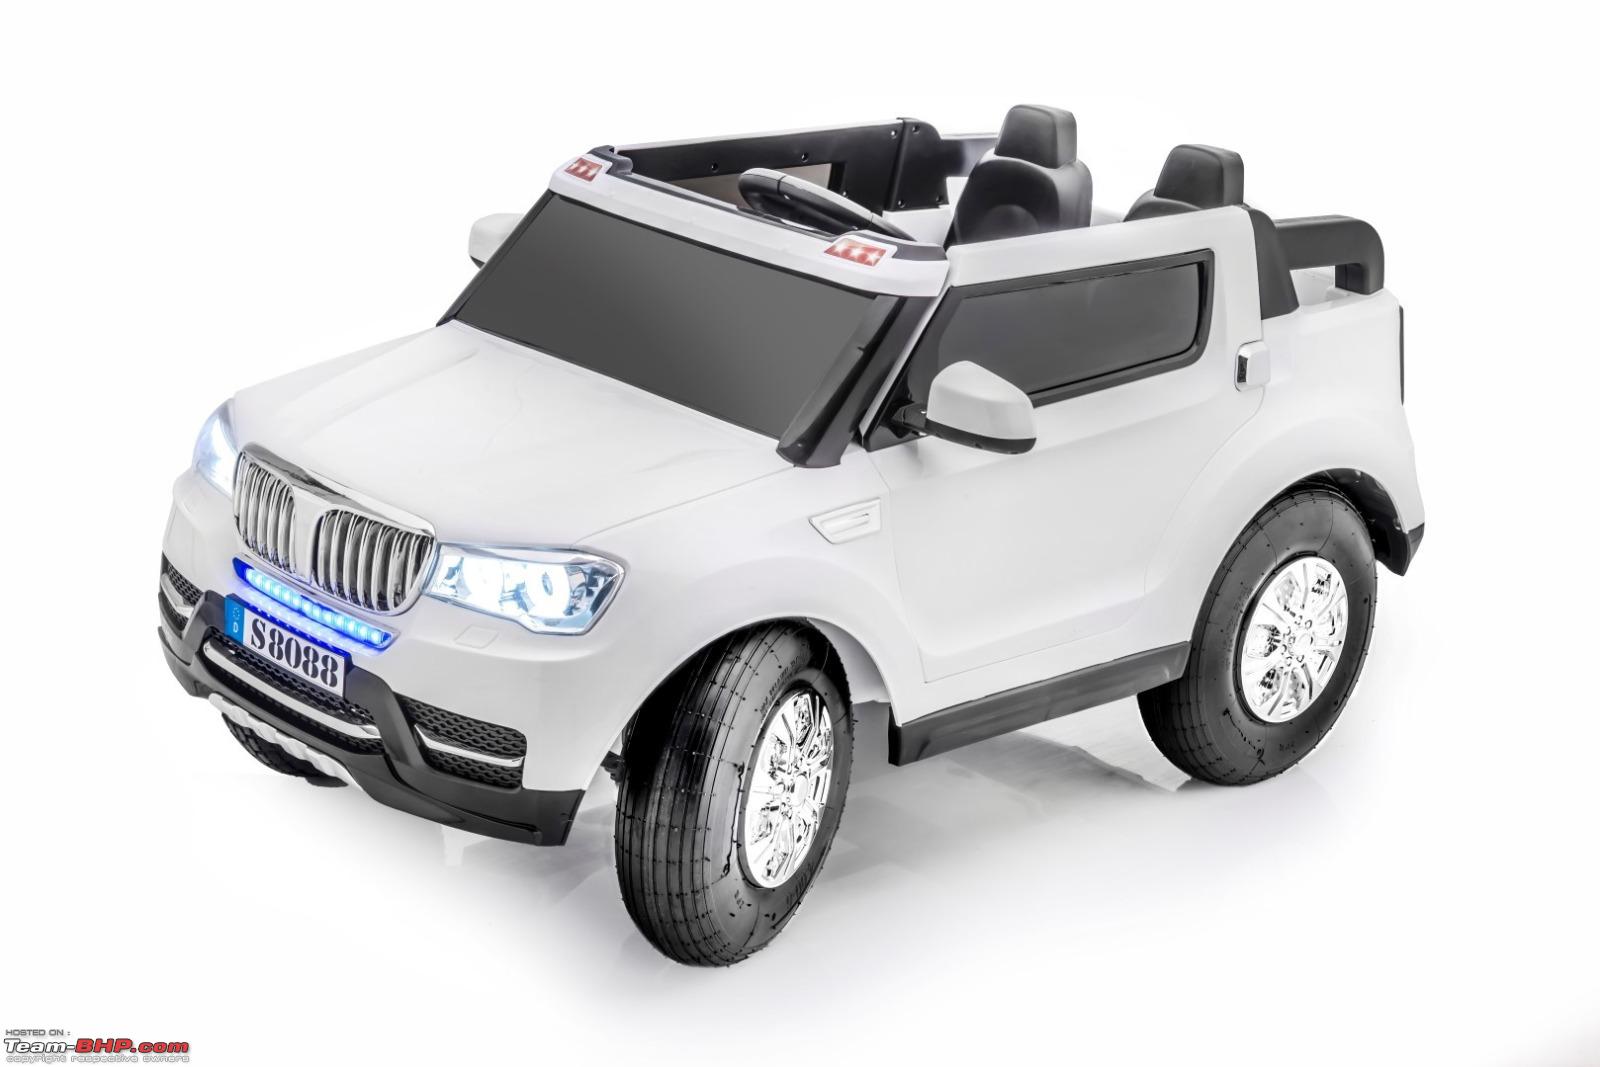 thar jeep for kids